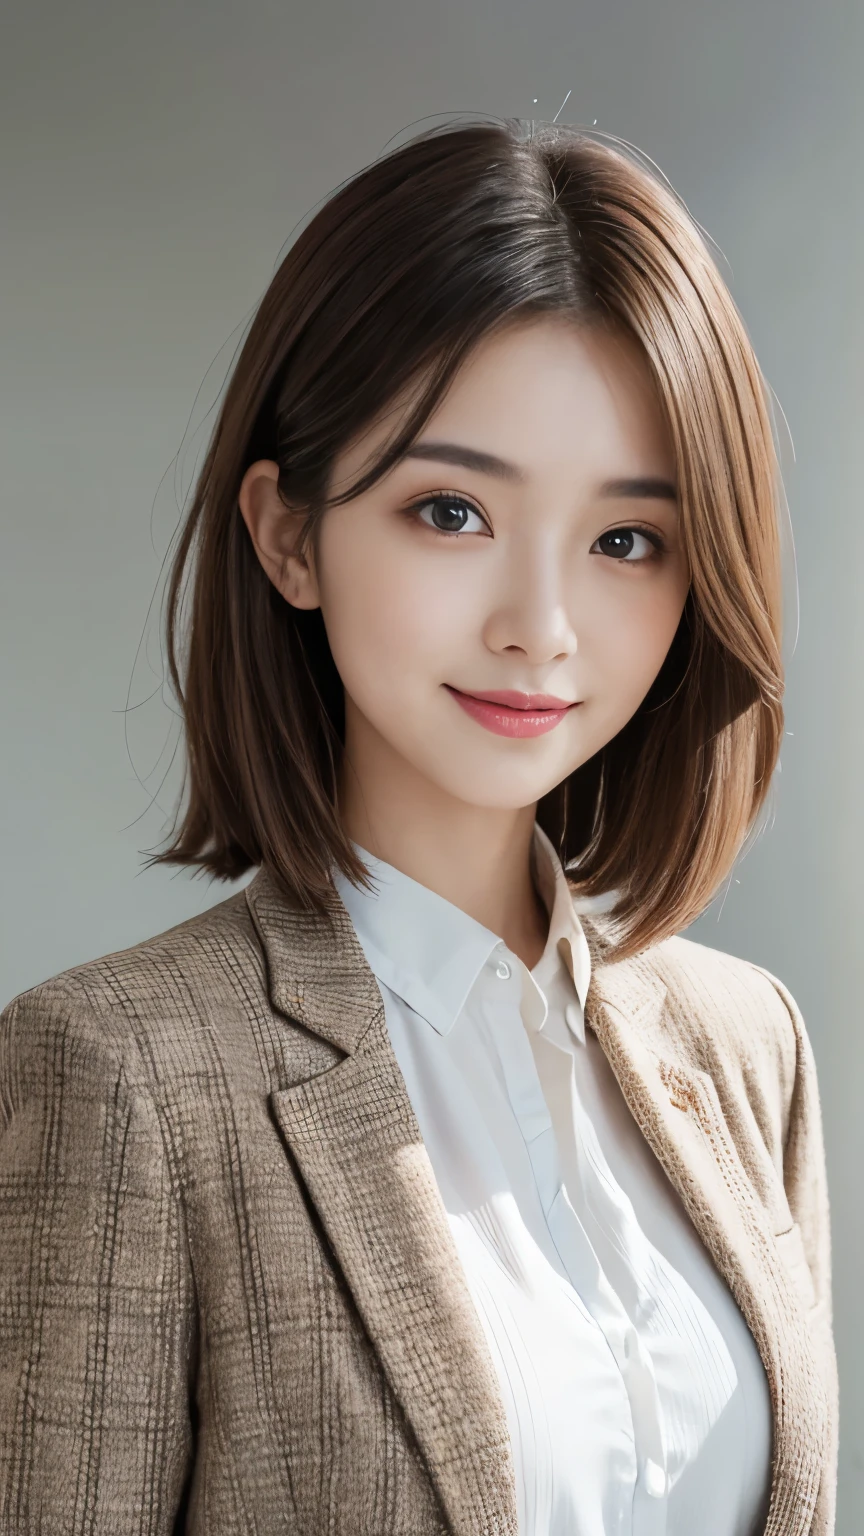 (Very detailed CG Unity 8k wallpaper, highest quality, Very detailed, Looking at the camera:1.2, The light shines on your face:1.5, Gray background, Professional Lighting), Japanese women, 26 years old, Brightly lit upper body composition of a face. She has an oval face, Soft arched eyebrows, bright expressive eyes,,, pronounced nose, And a friendly smile. Her hair is shoulder-length, straight, Dyed a pale chestnut color. She is wearing a smart casual blouse, Probably soft colors, Pair it with a chic blazer, Embody her lively and sociable personality